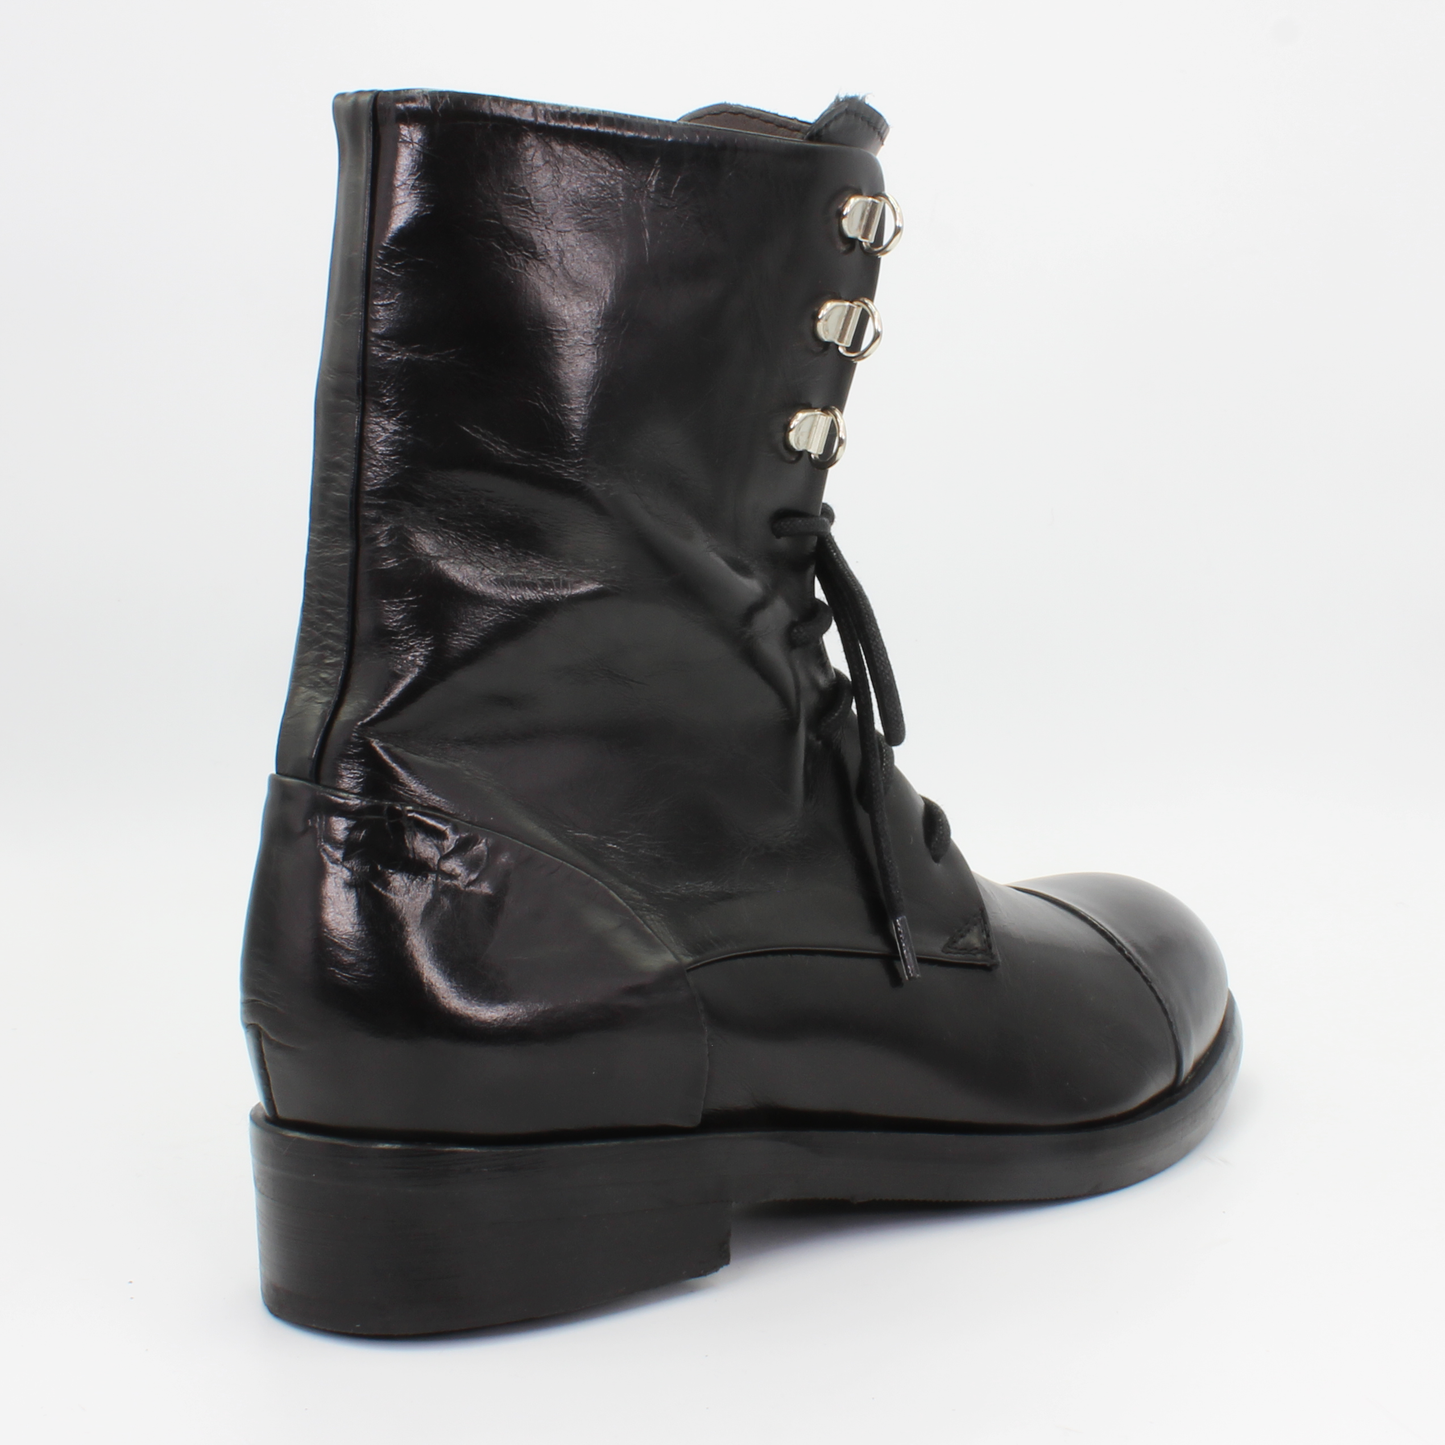 Shop Handmade Italian Leather Lace-up Ankle Boot in Nero Black (JP35773/1) or browse our range of hand-made Italian boots in leather or suede in-store at Aliverti Cape Town, or shop online. We deliver in South Africa & offer multiple payment plans as well as accept multiple safe & secure payment methods.